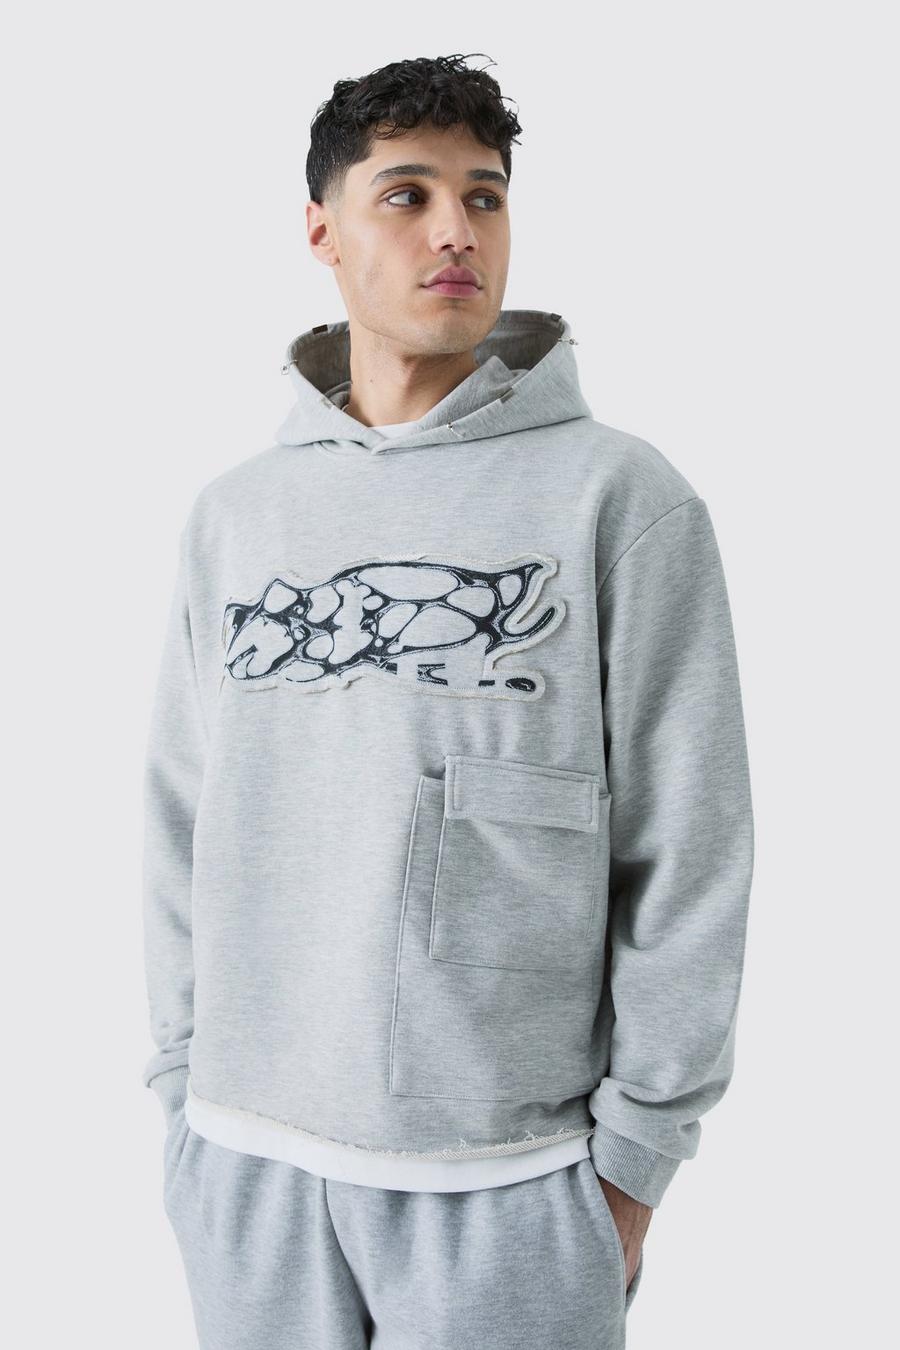 Grey marl Oversized Boxy Heavy Distressed Applique Hoodie